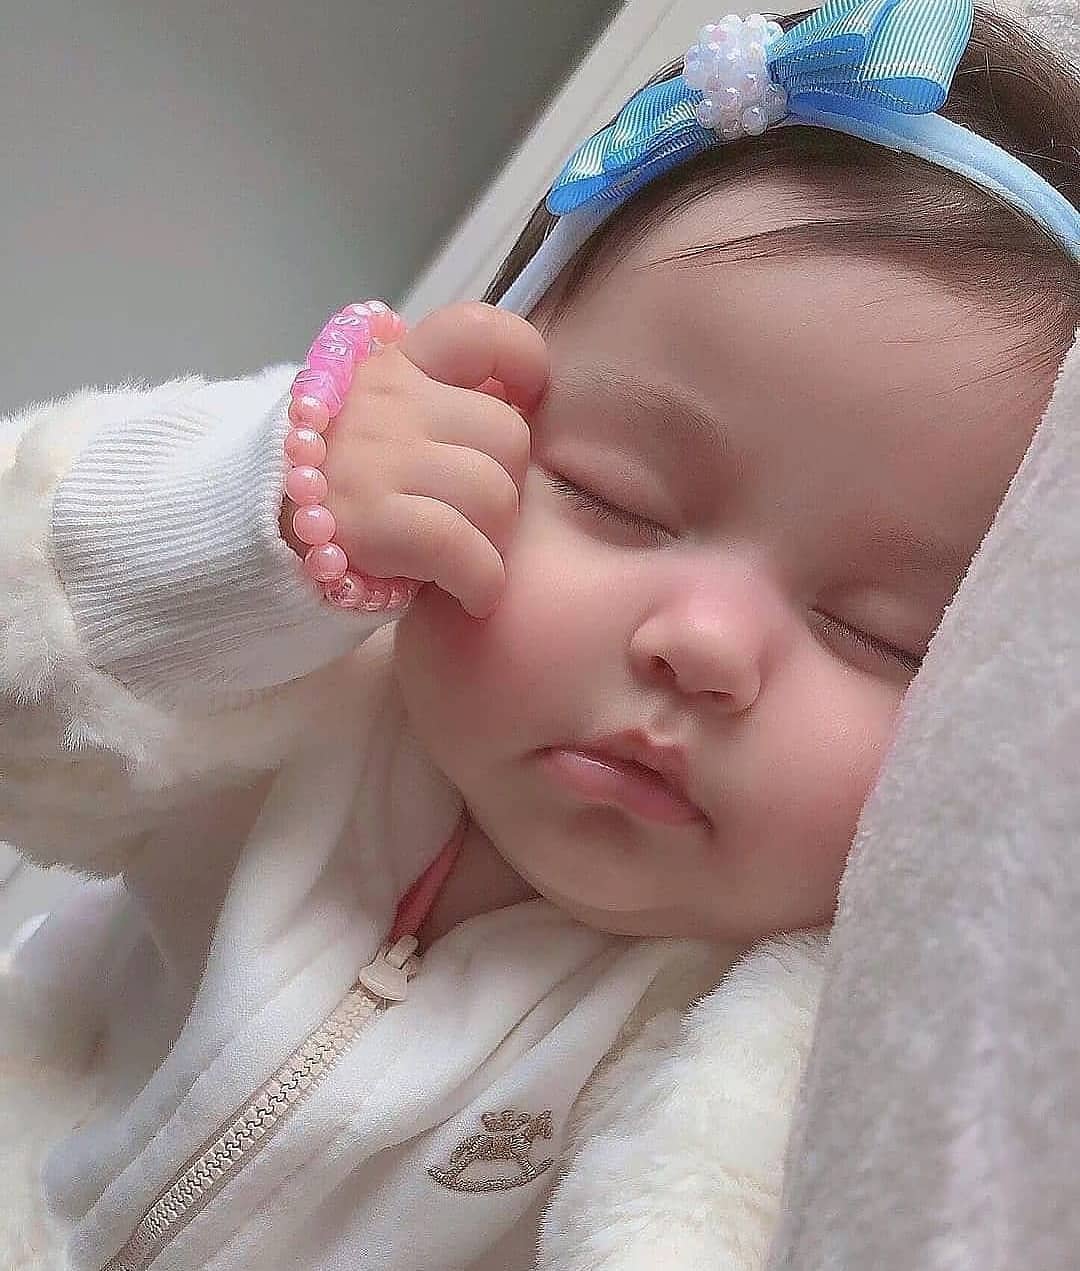 Sleeping baby Instagram profile picture